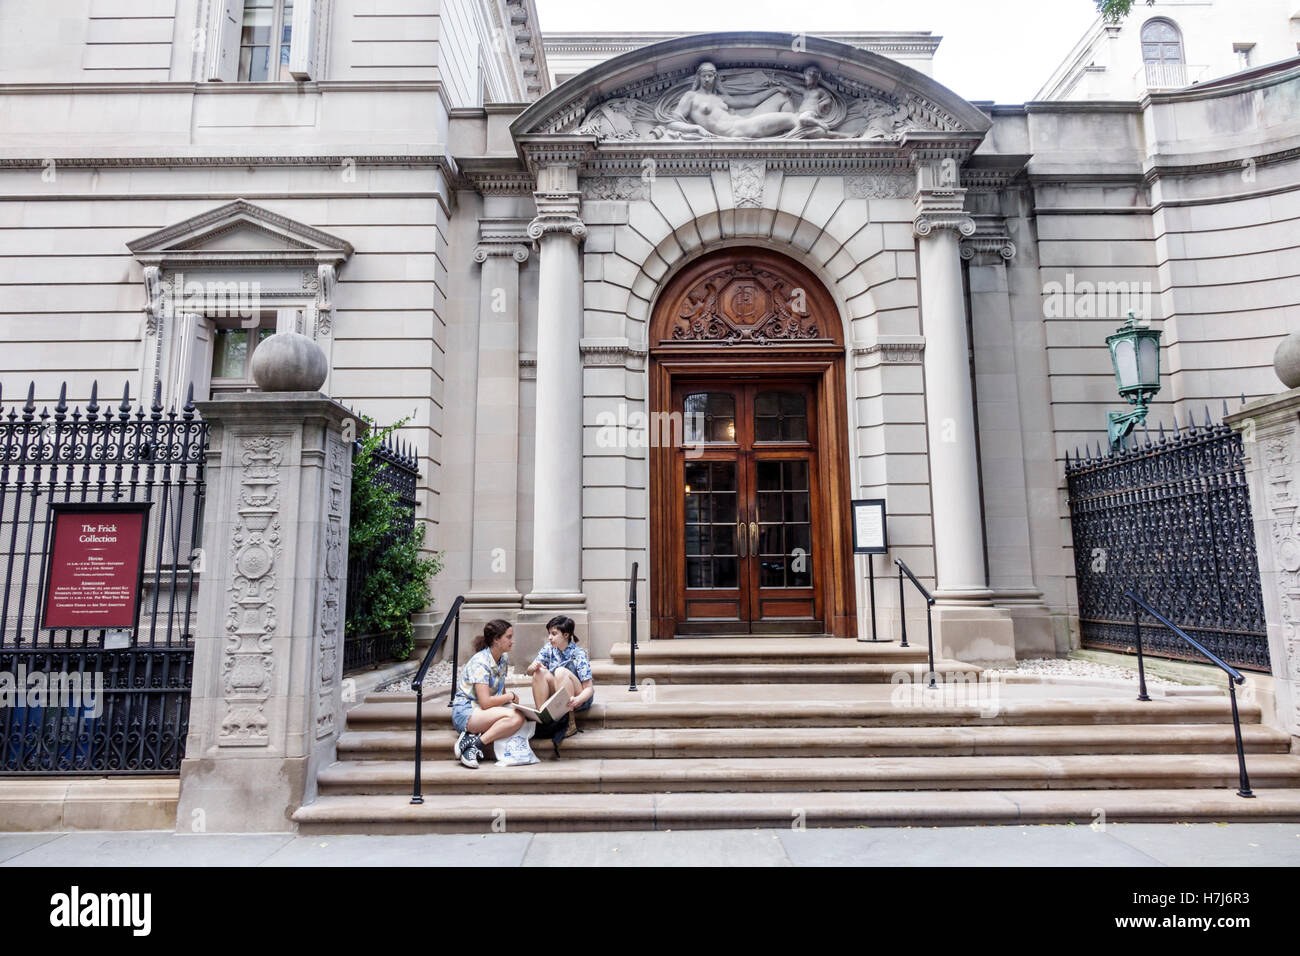 New York City,NY NYC,Manhattan,Upper East Side,The Frick Collection,art artwork museum,exterior,main entrance,arched pediment,teen teens teenage teena Stock Photo